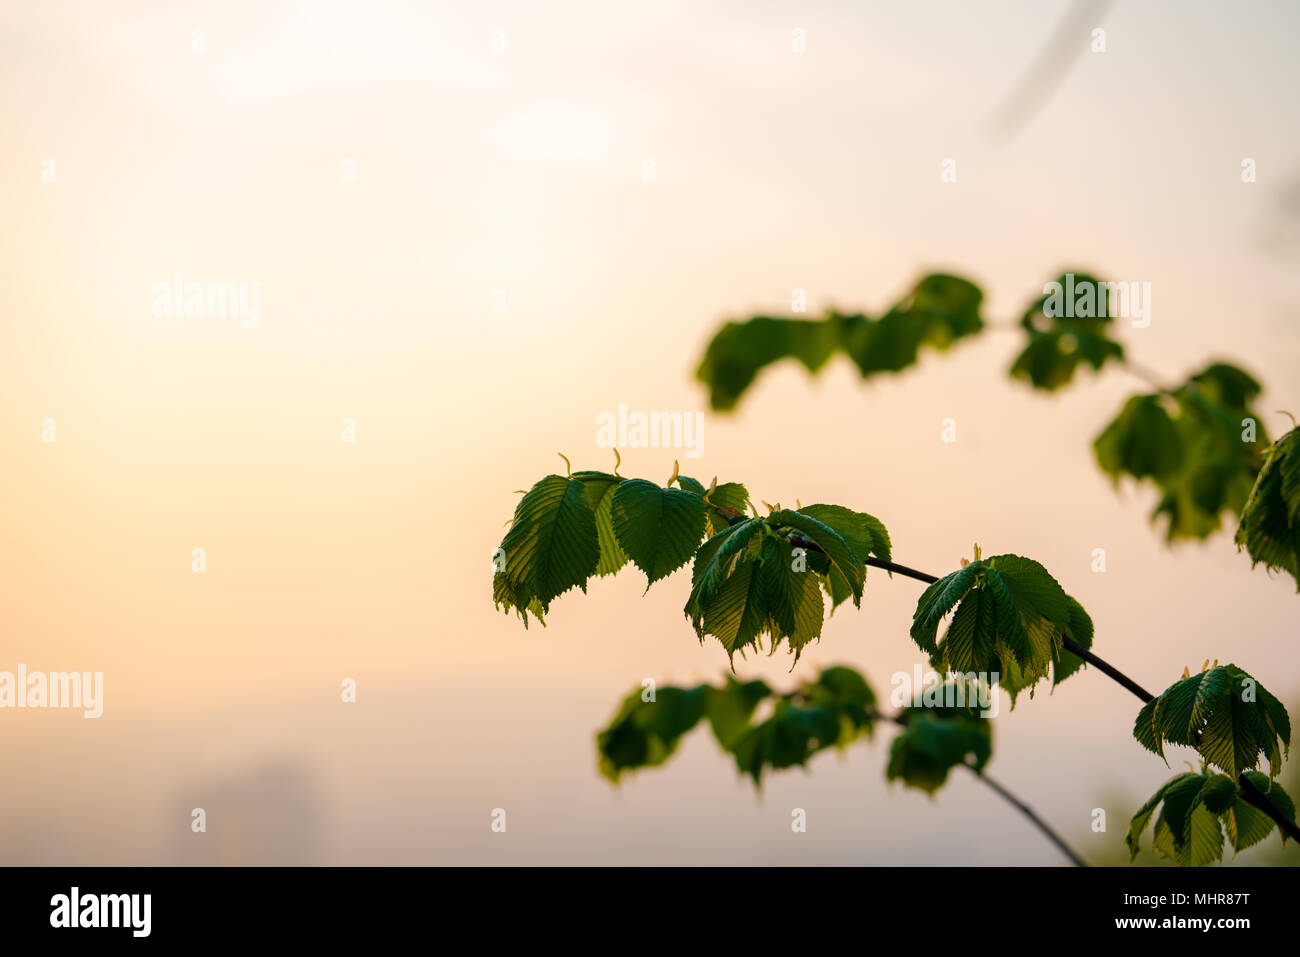 tree branch with green leaves at dawn Stock Photo